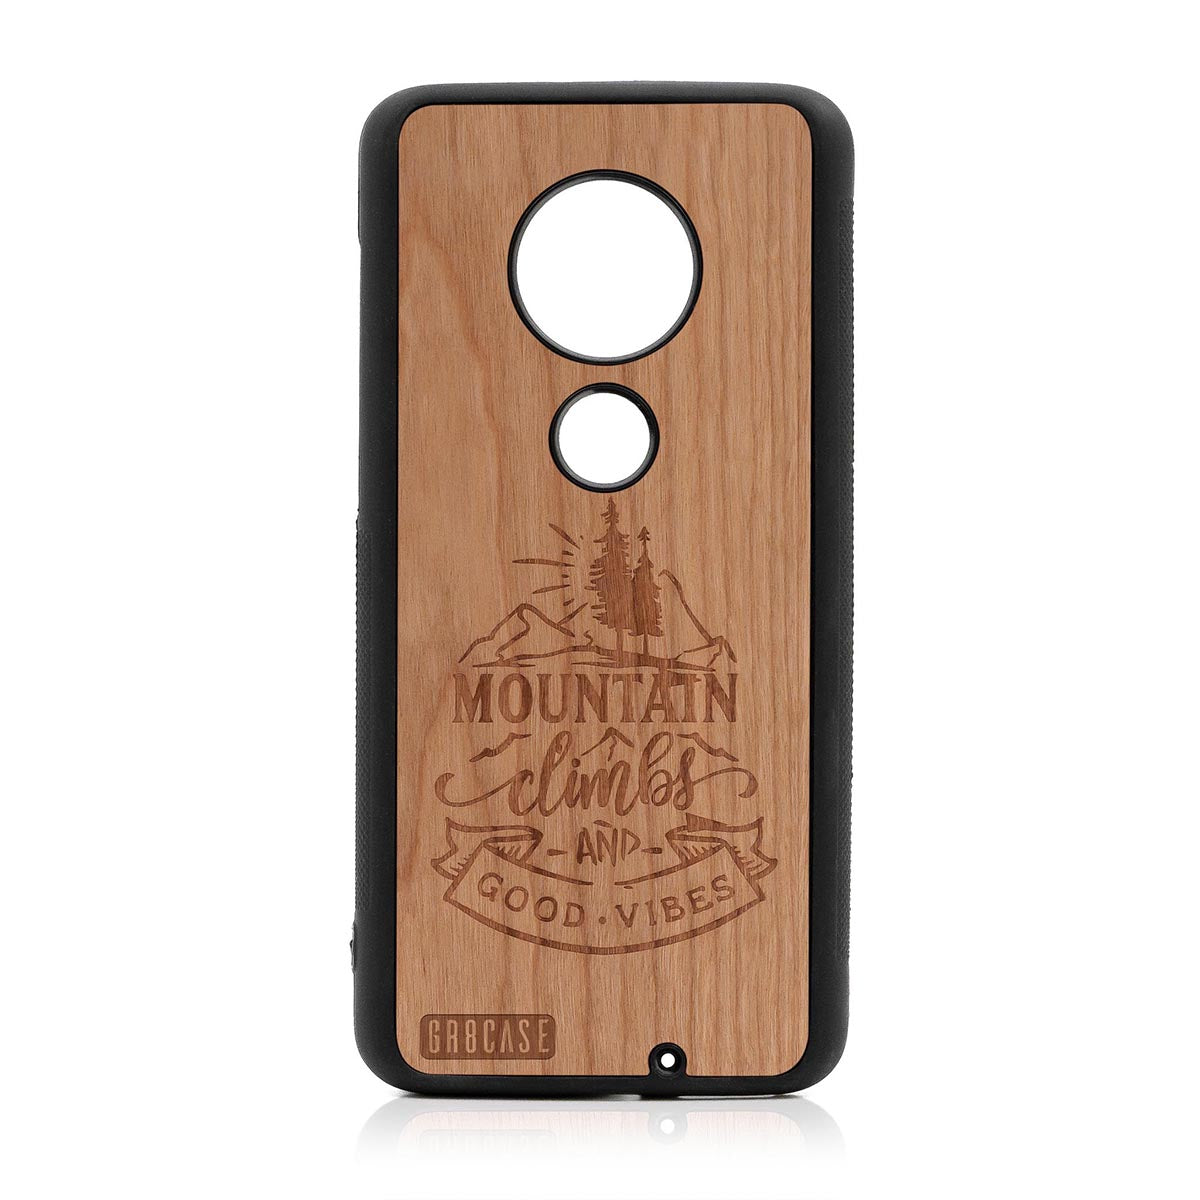 Mountain Climbs And Good Vibes Design Wood Case Moto G7 Plus by GR8CASE